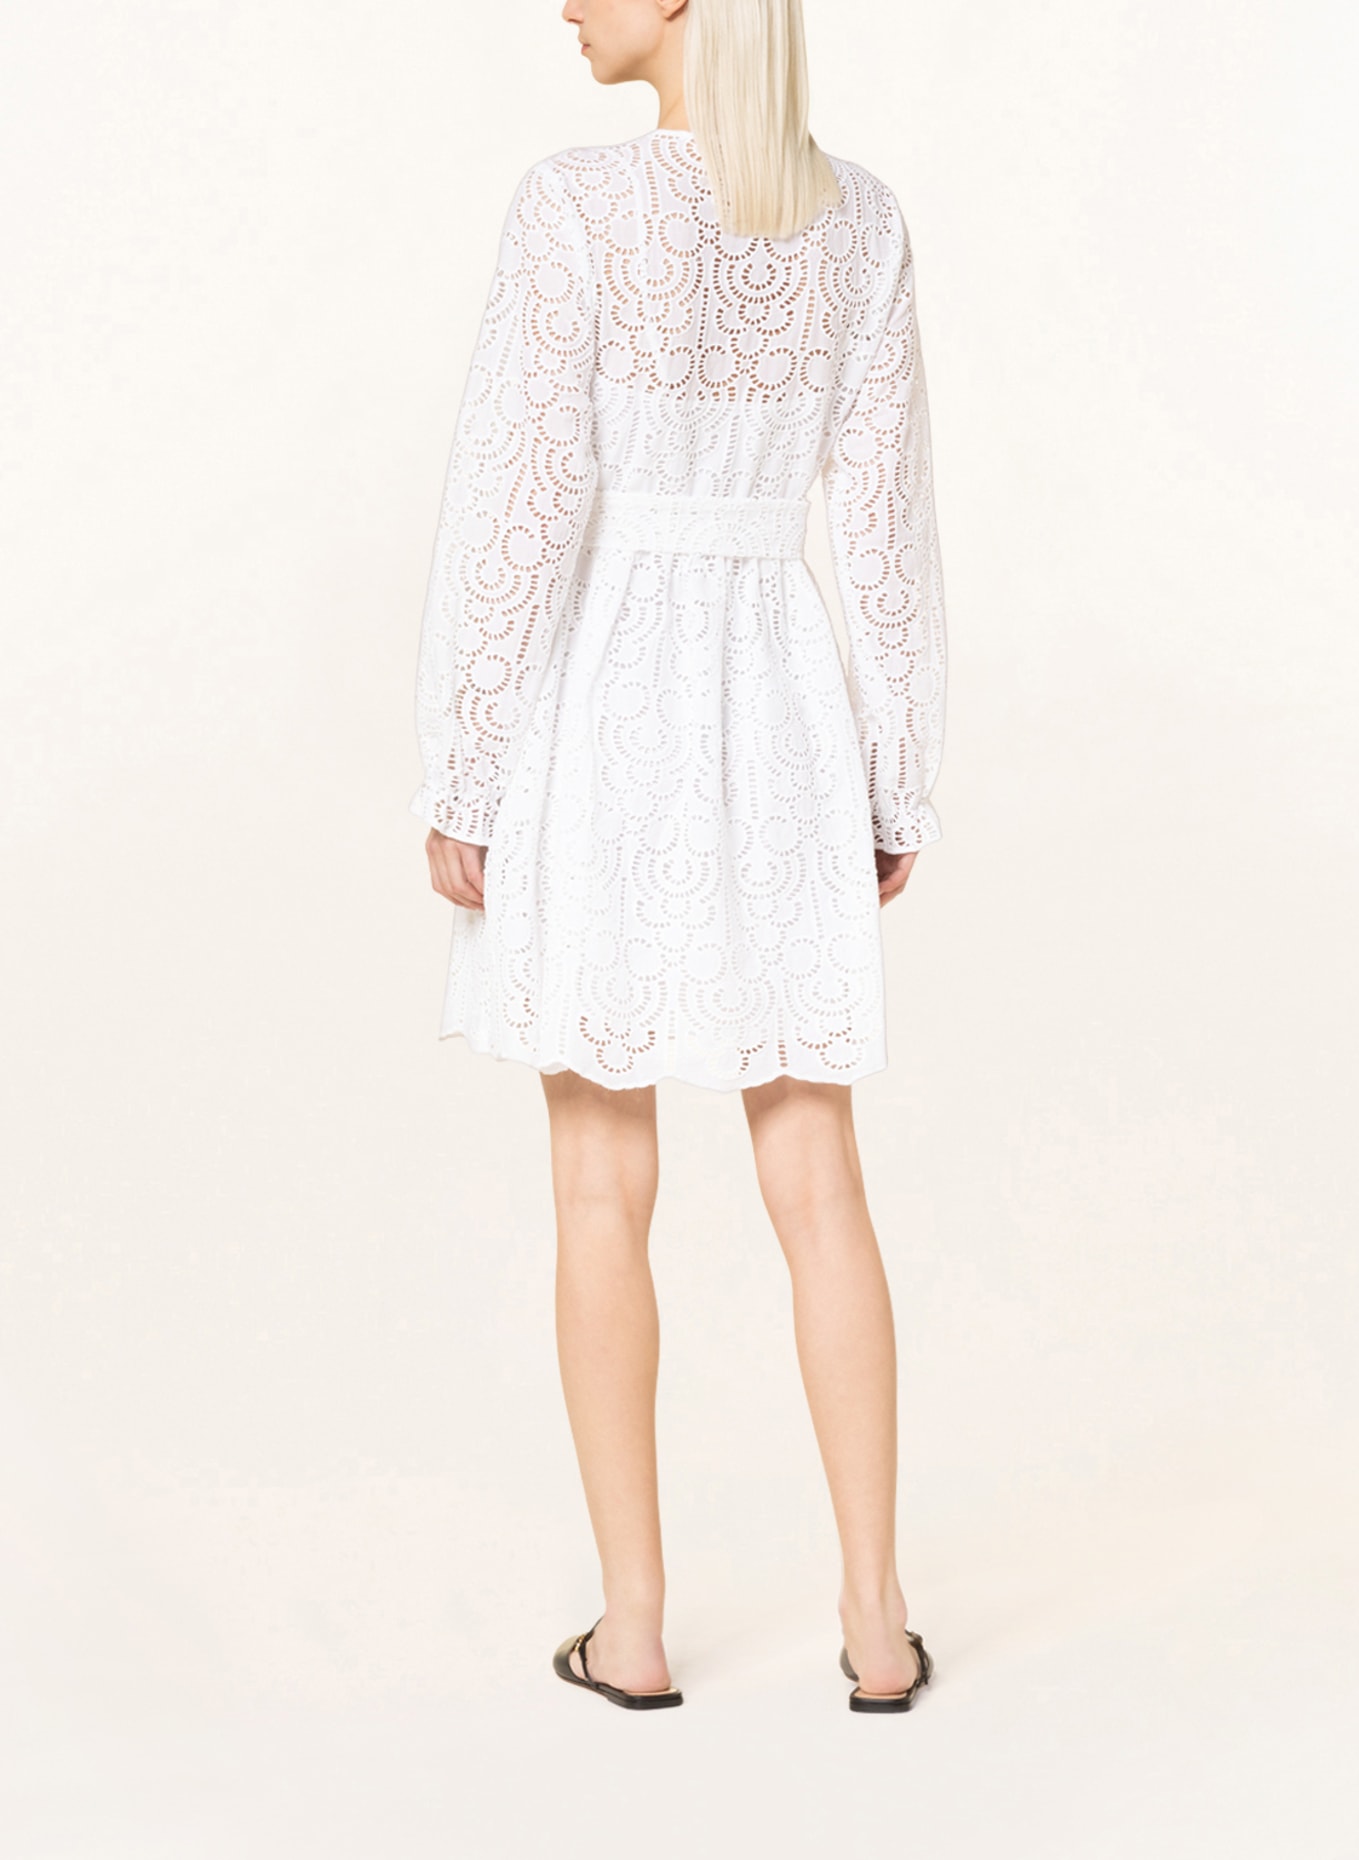 MRS & HUGS Shirt dress made of lace, Color: WHITE (Image 3)